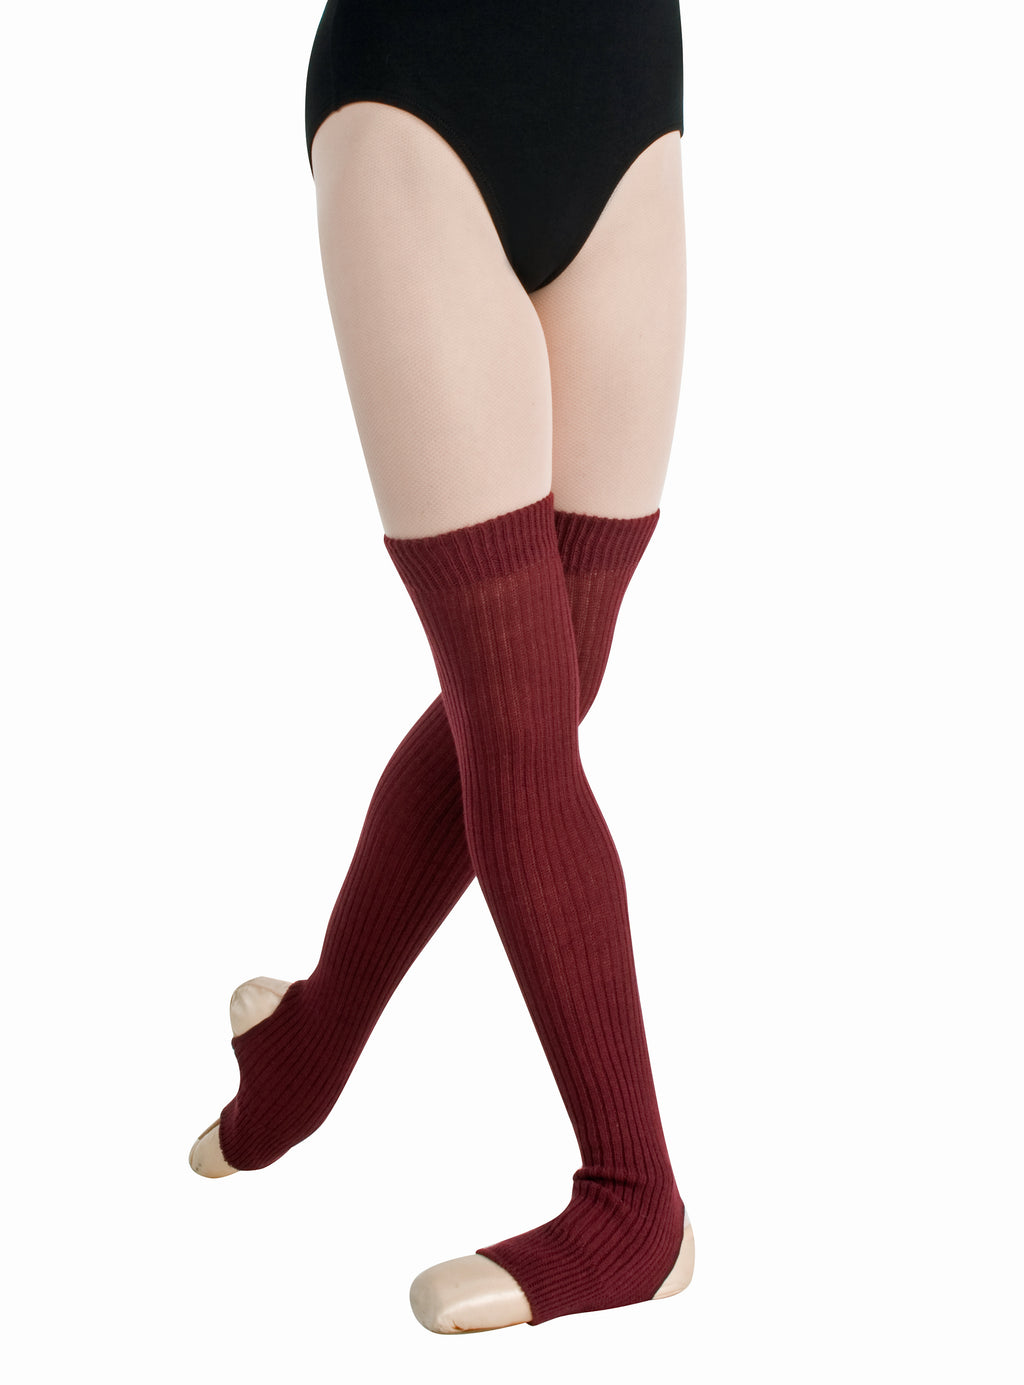 Body Wrappers Stirrup Leg Warmers in a Variety of Colors and Lengths